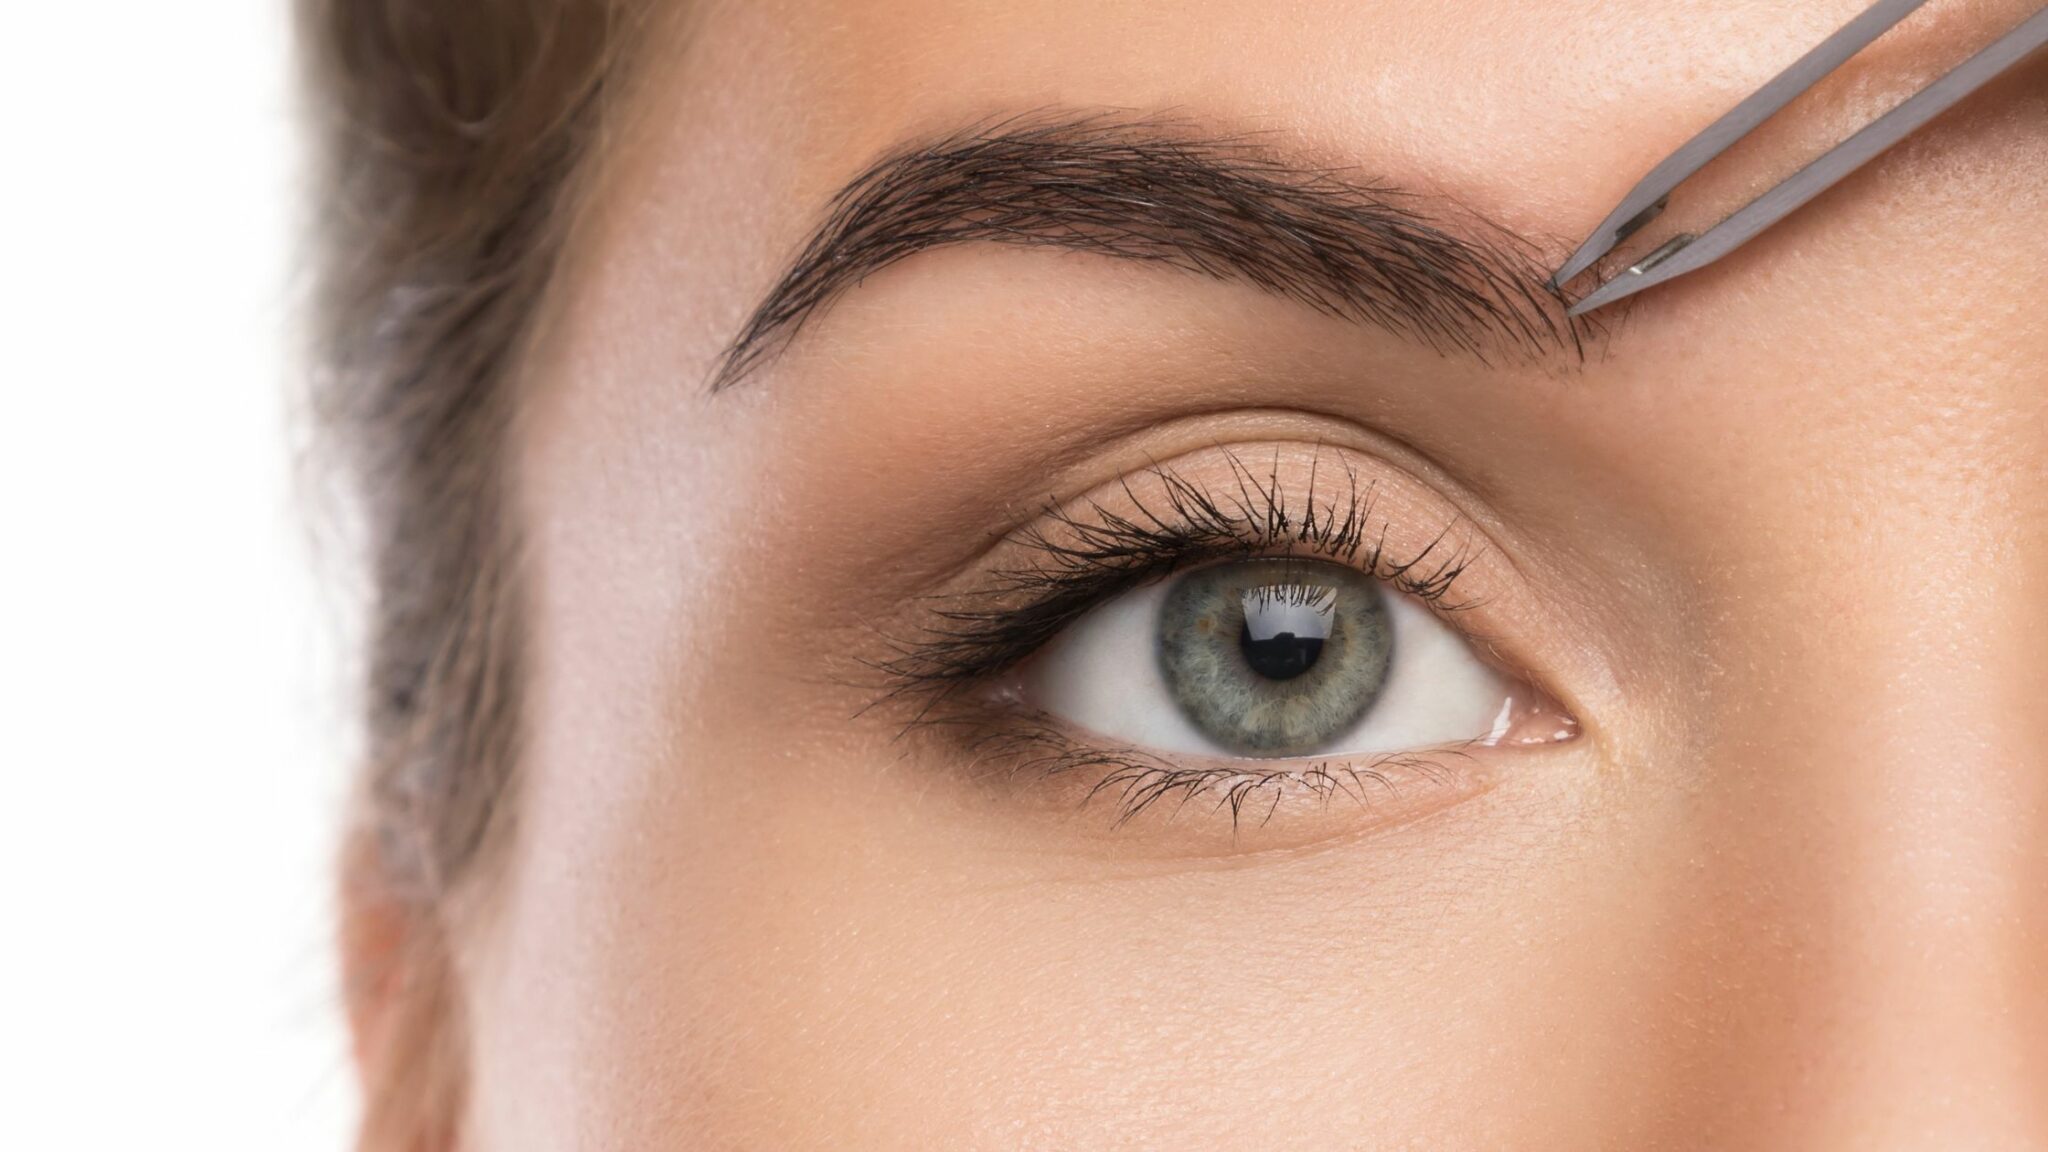 The Arched Eyebrow Trend And Guide To Get Perfect Arched Eyebrows